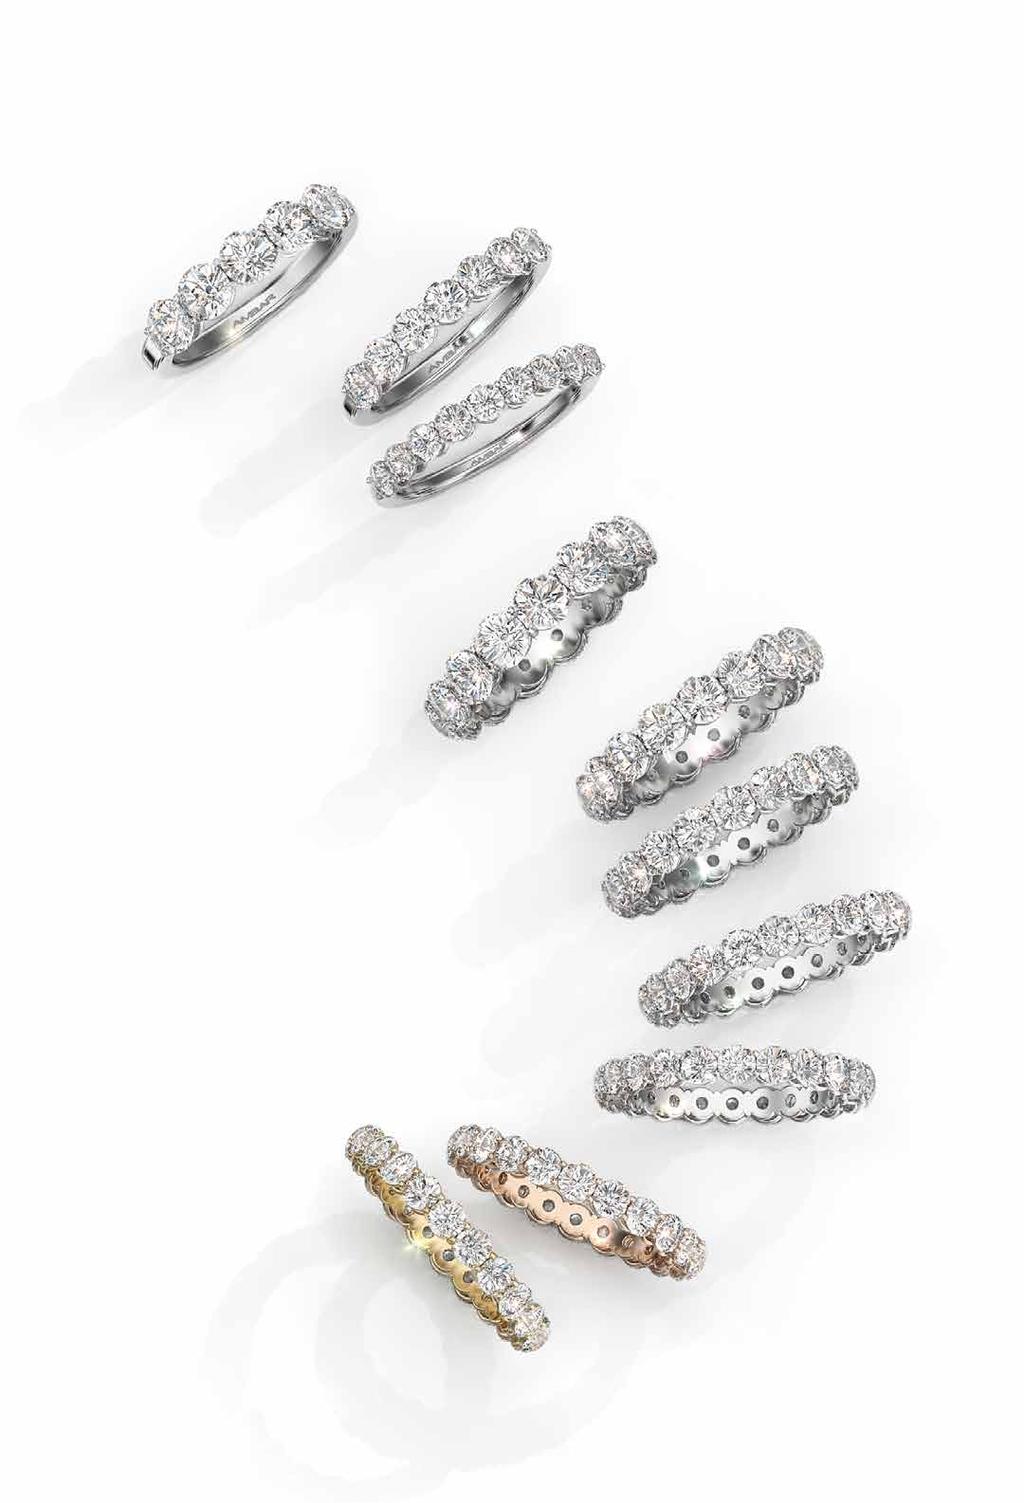 Divine Cut Diamond Bands Magnificent Divine Cut diamonds in your choice of all the way